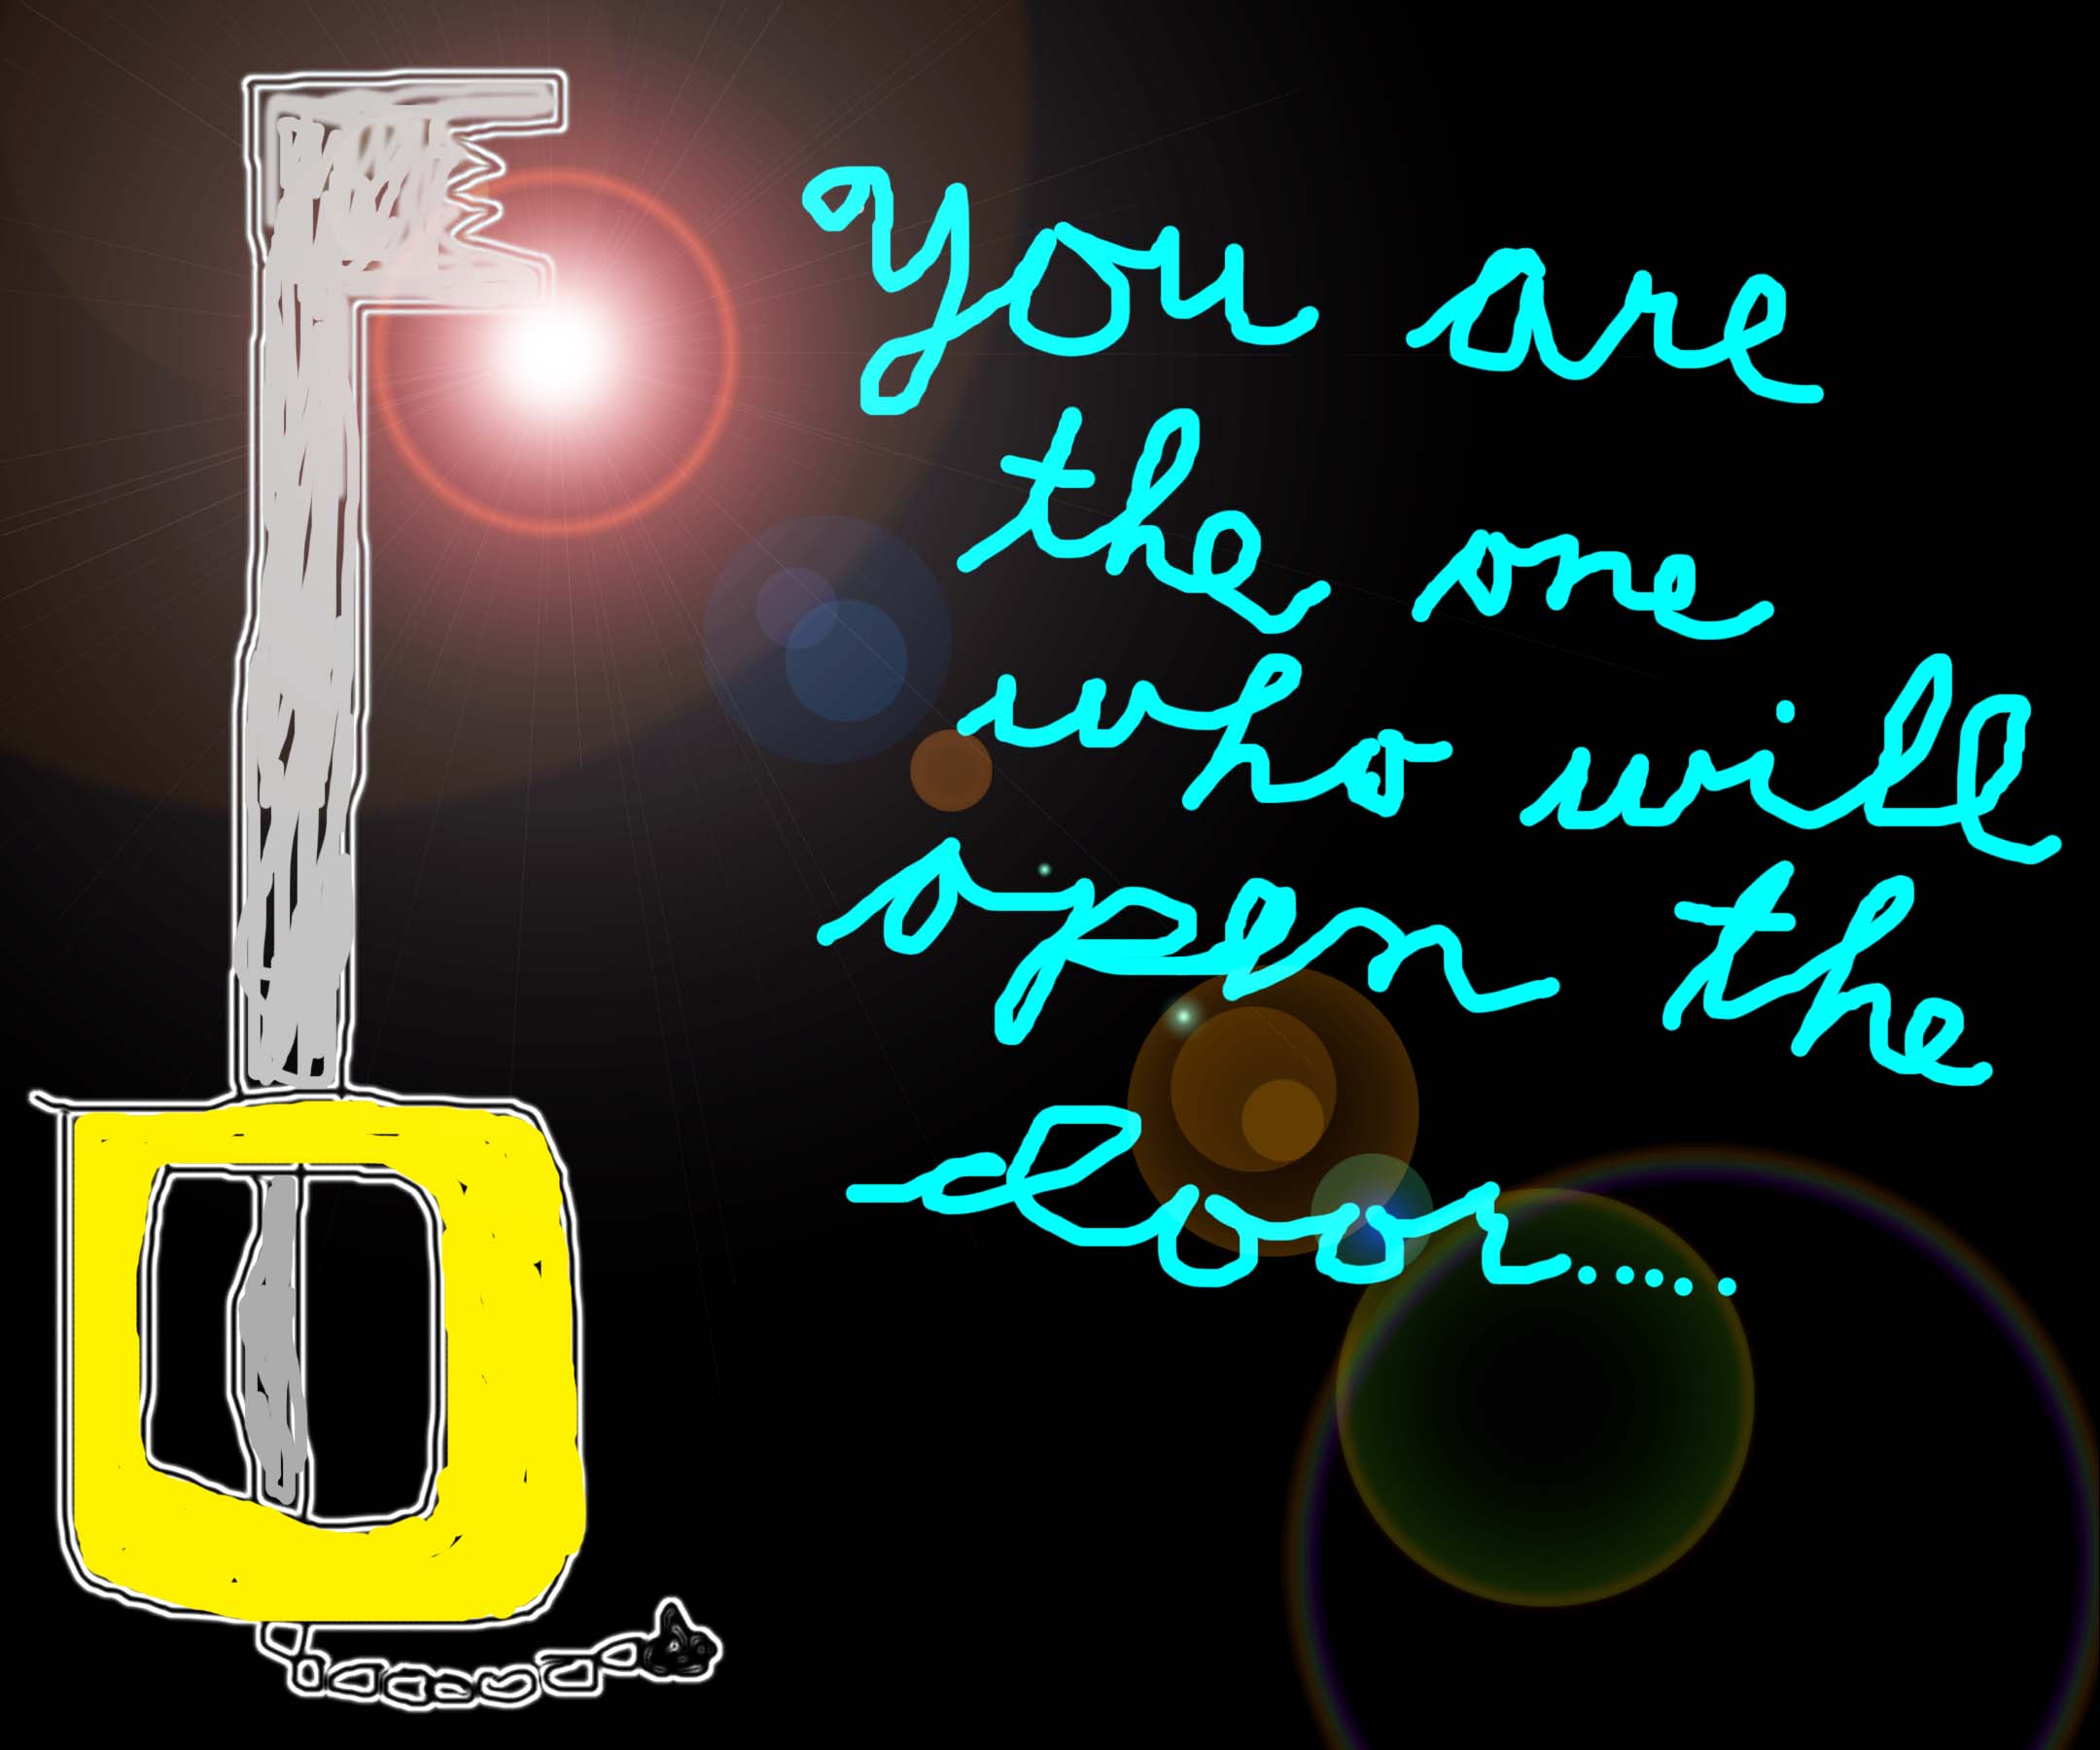 You are the one who will open the door... by kingdomheartsgal